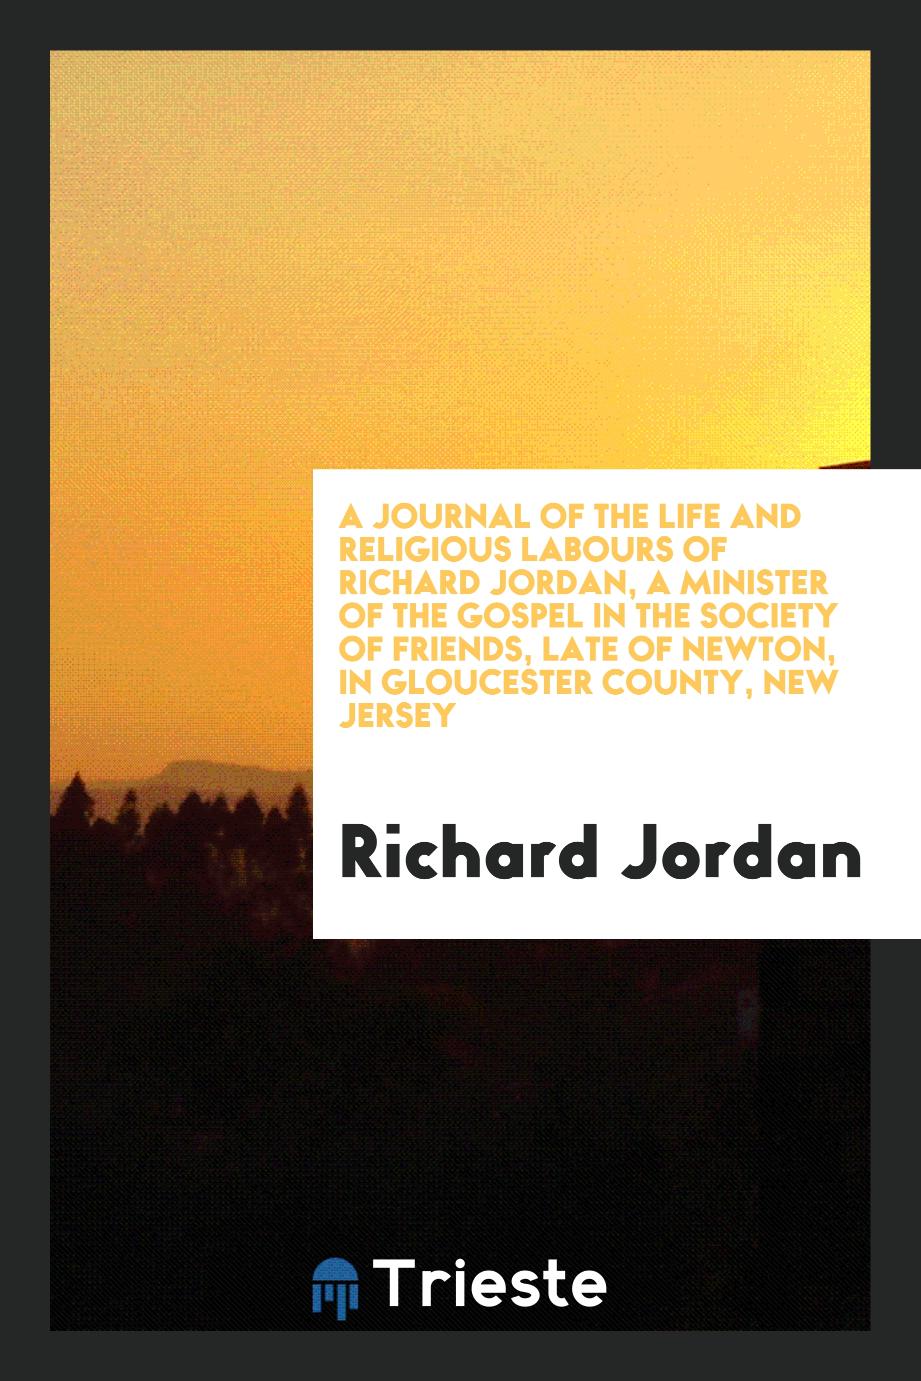 A Journal of the Life and Religious Labours of Richard Jordan, a Minister of the Gospel in the Society of Friends, Late of Newton, in Gloucester County, New Jersey